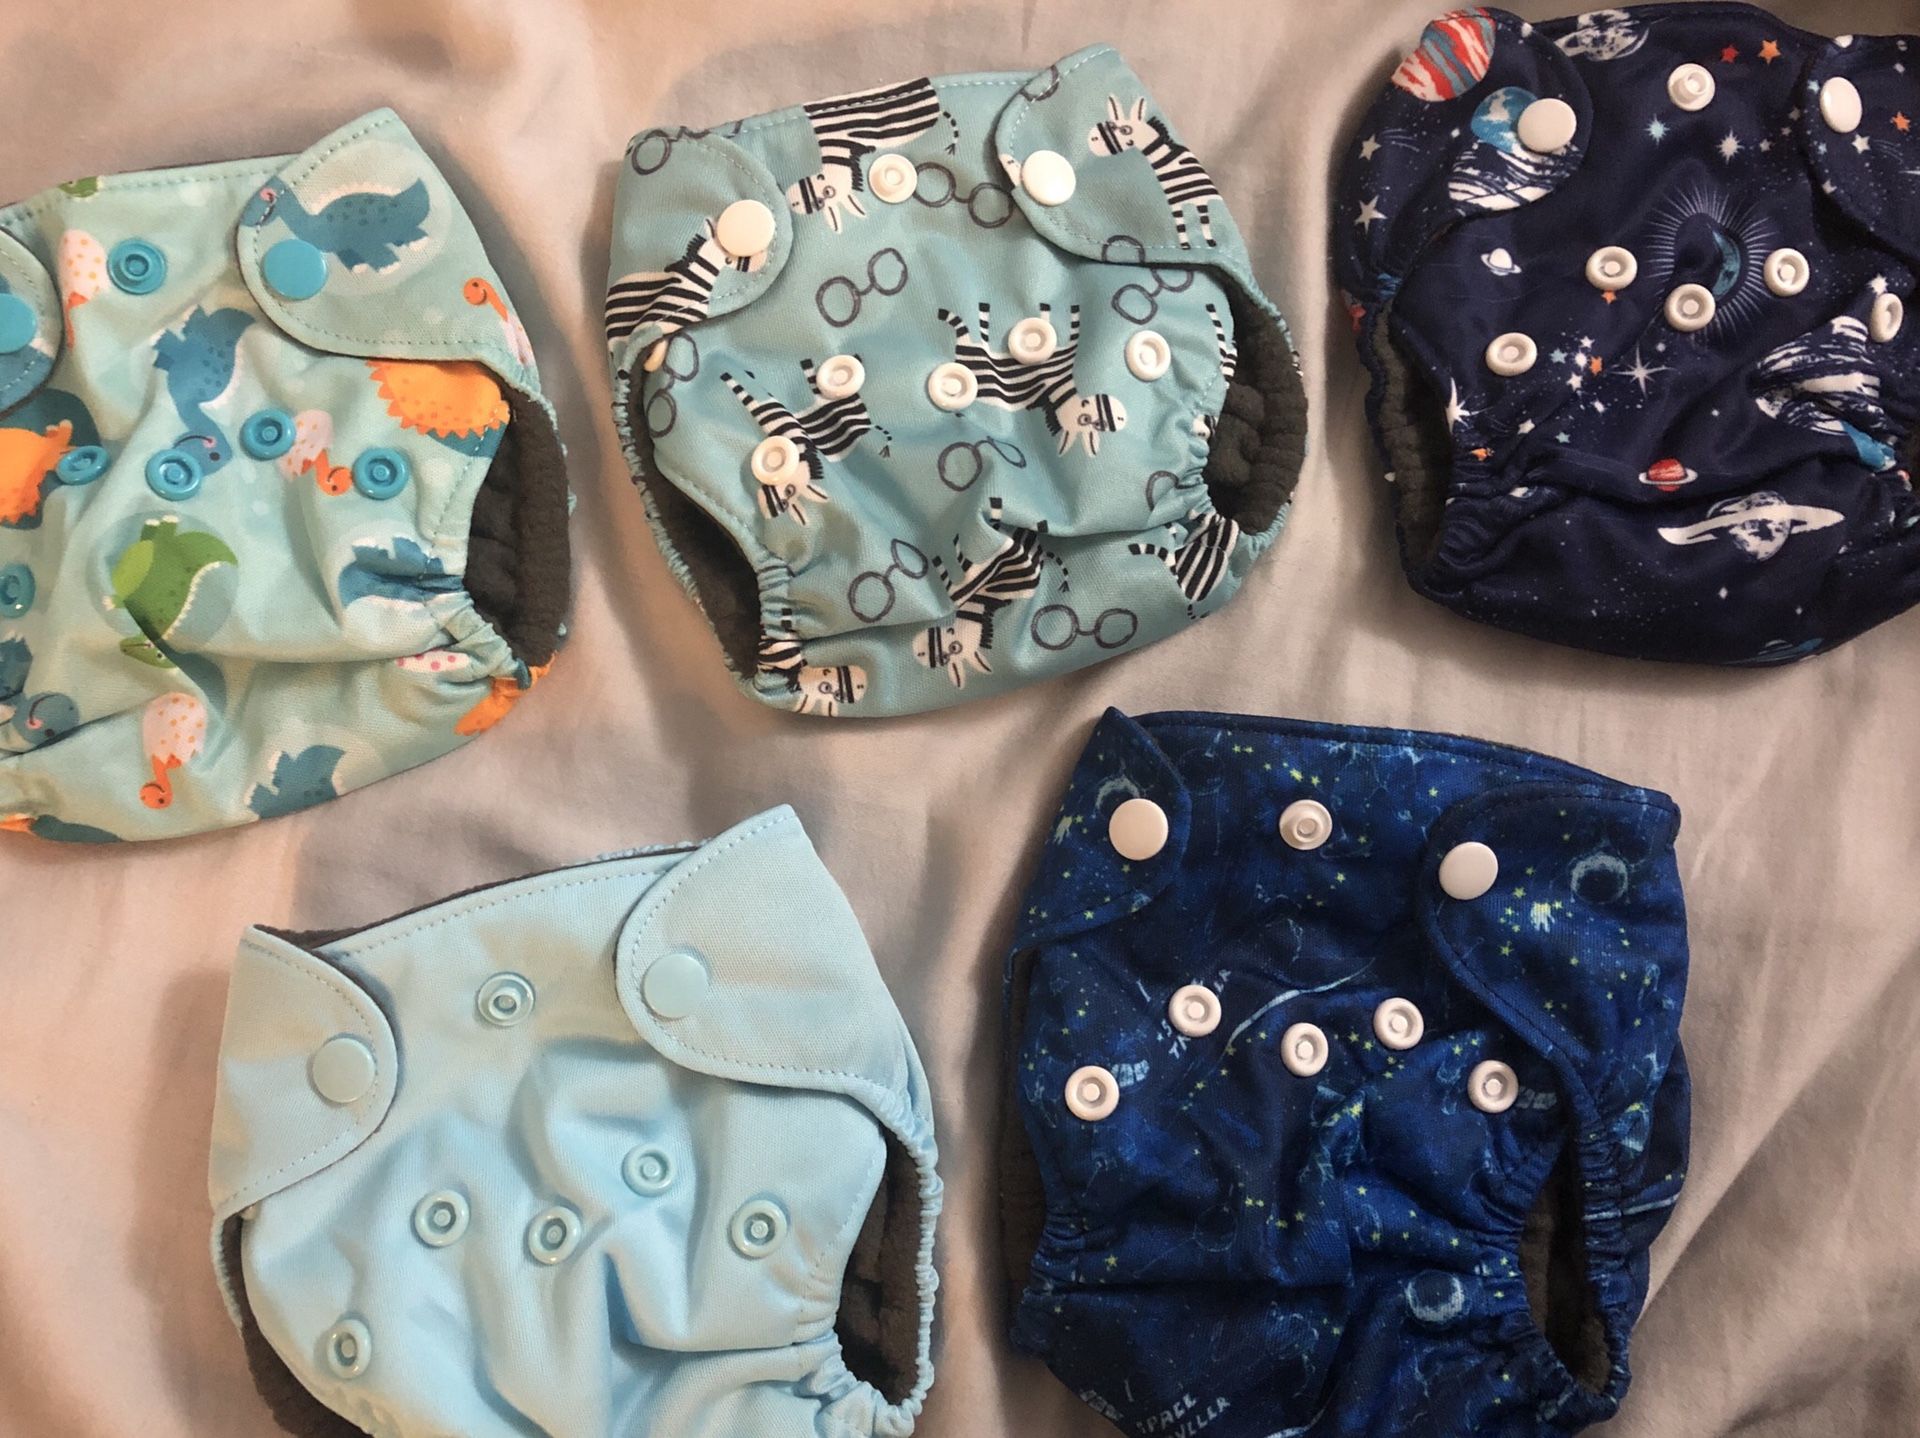 New out of package newborn cloth diapers